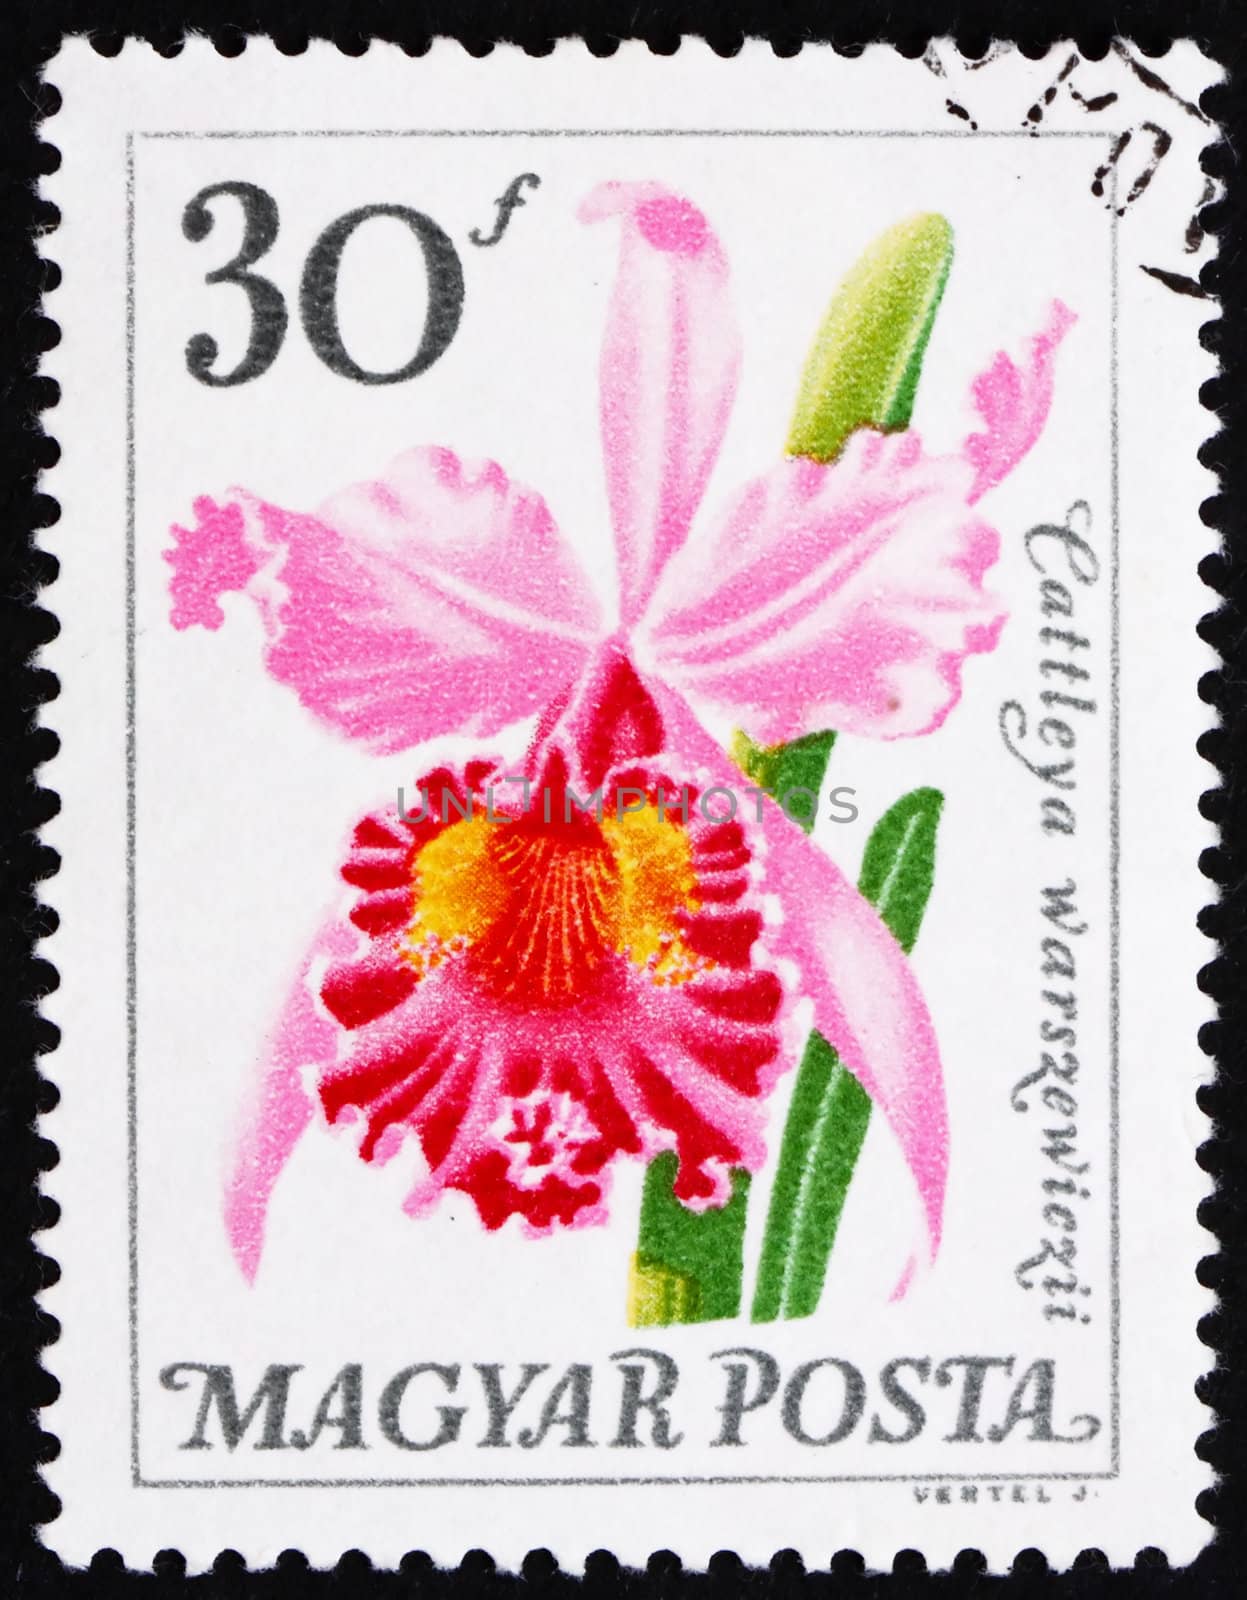 HUNGARY - CIRCA 1965: a stamp printed in the Hungary shows Flower, Cattleya Warszewiczii, Orchid, circa 1965